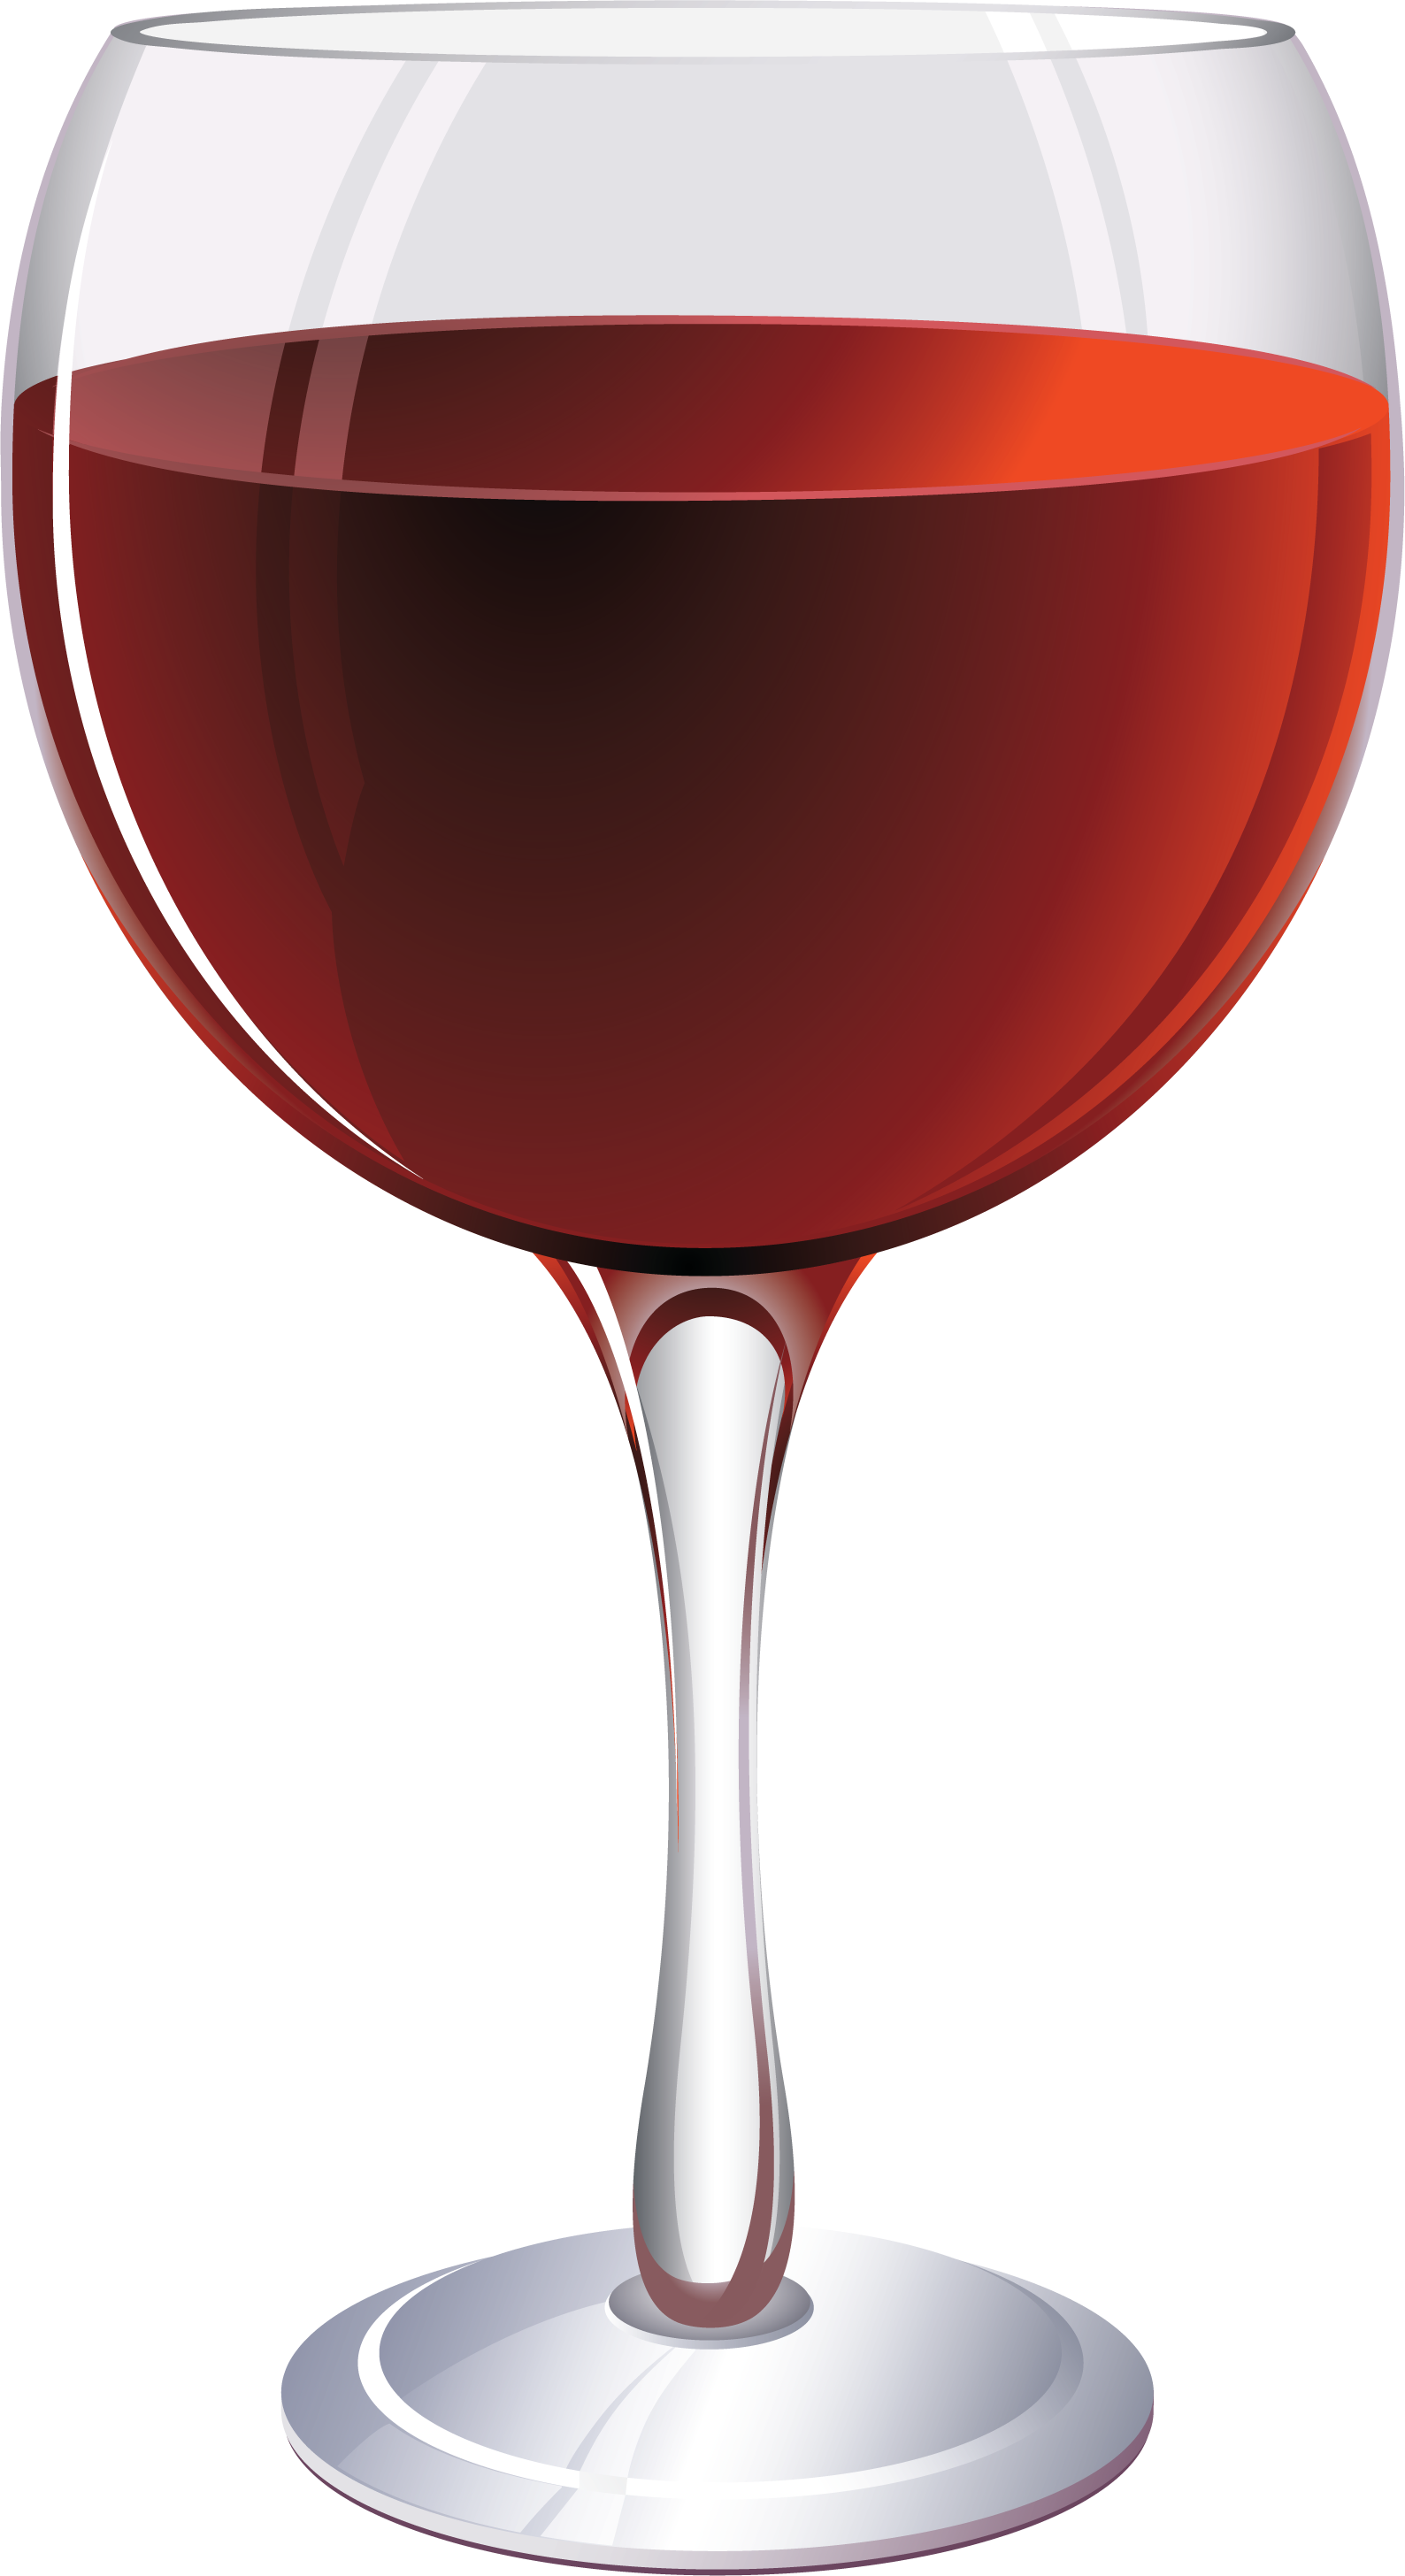 wine glass clip art pictures - photo #32